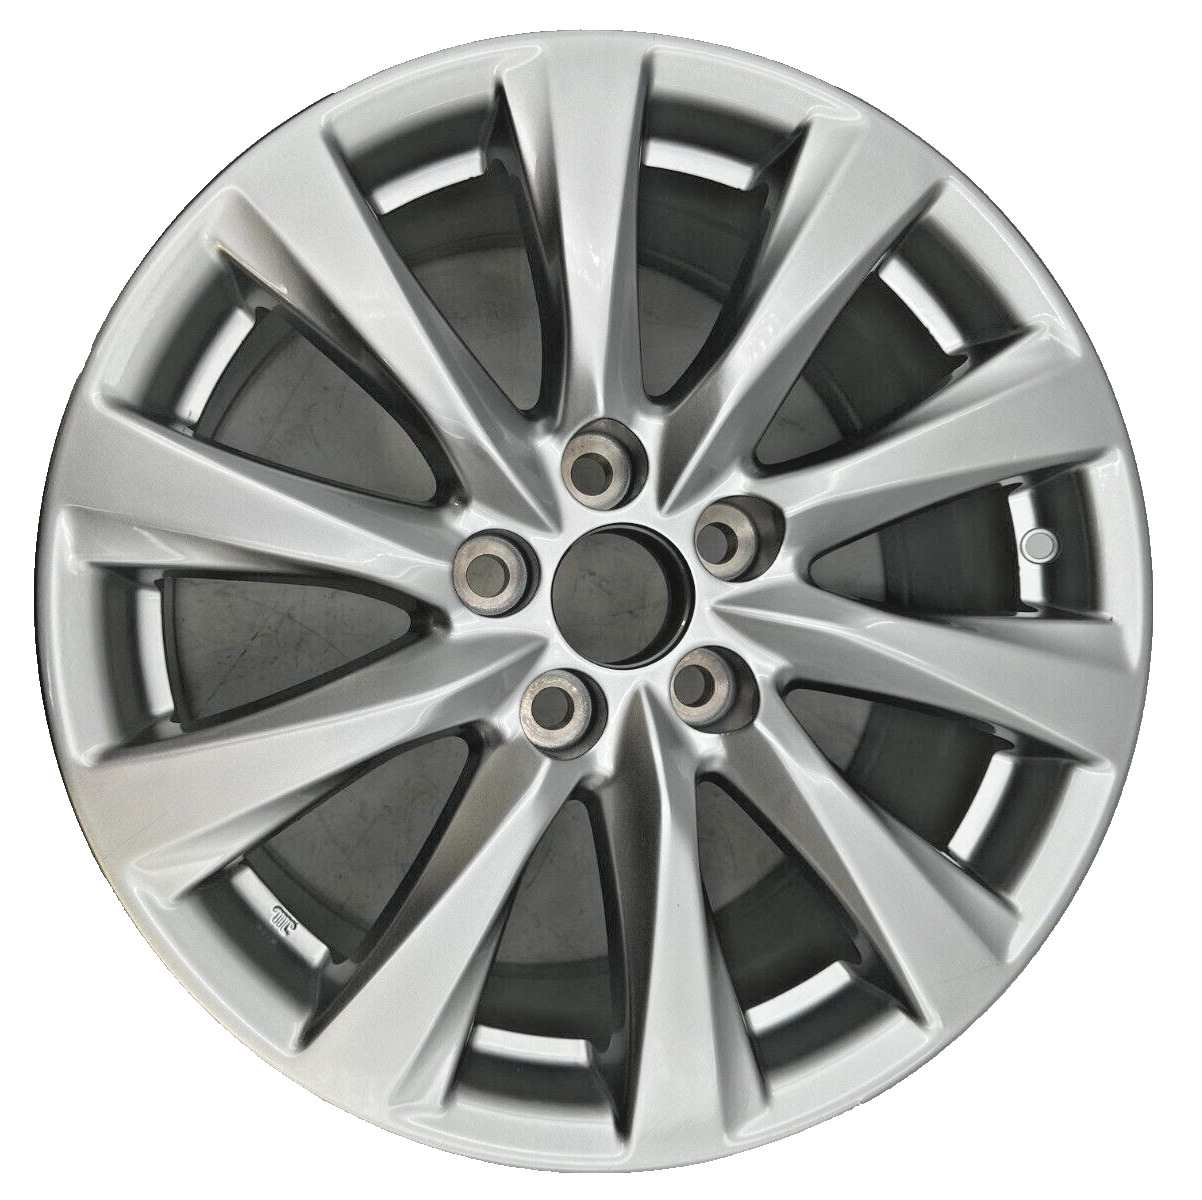 Toyota Camry Painted 17 x 7.5 Inch OEM Wheel